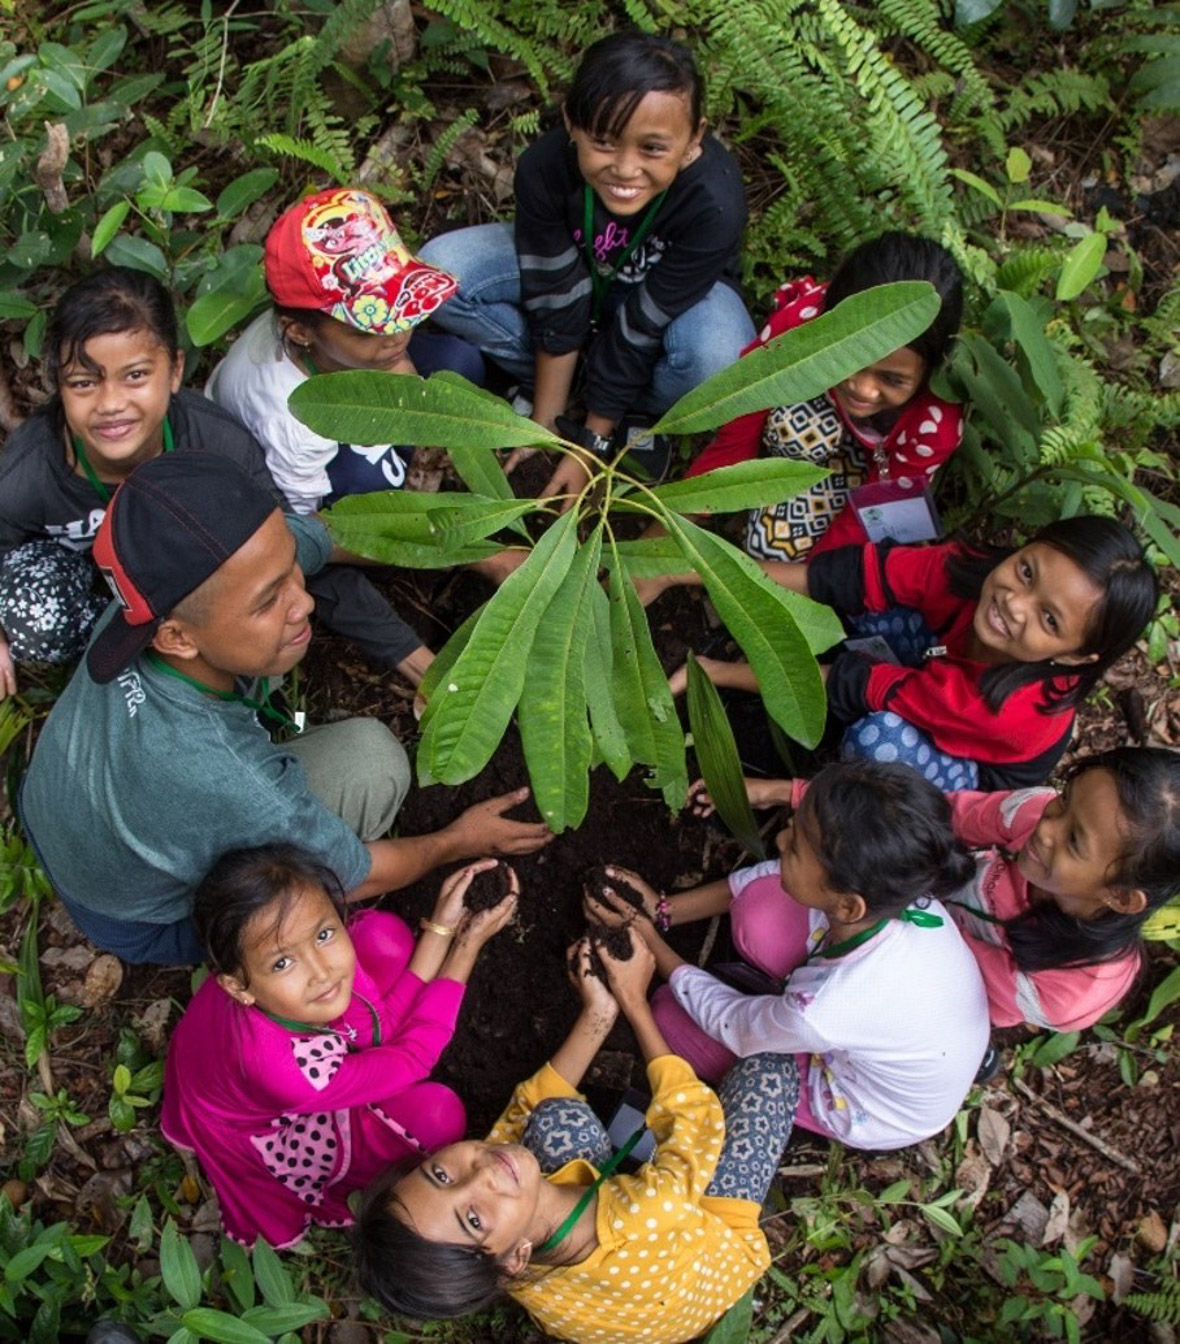 Ten local children learn about reforestation in Sebangau National Park. They are squatting in a circle around a leafy green plant and looking up at the camera.